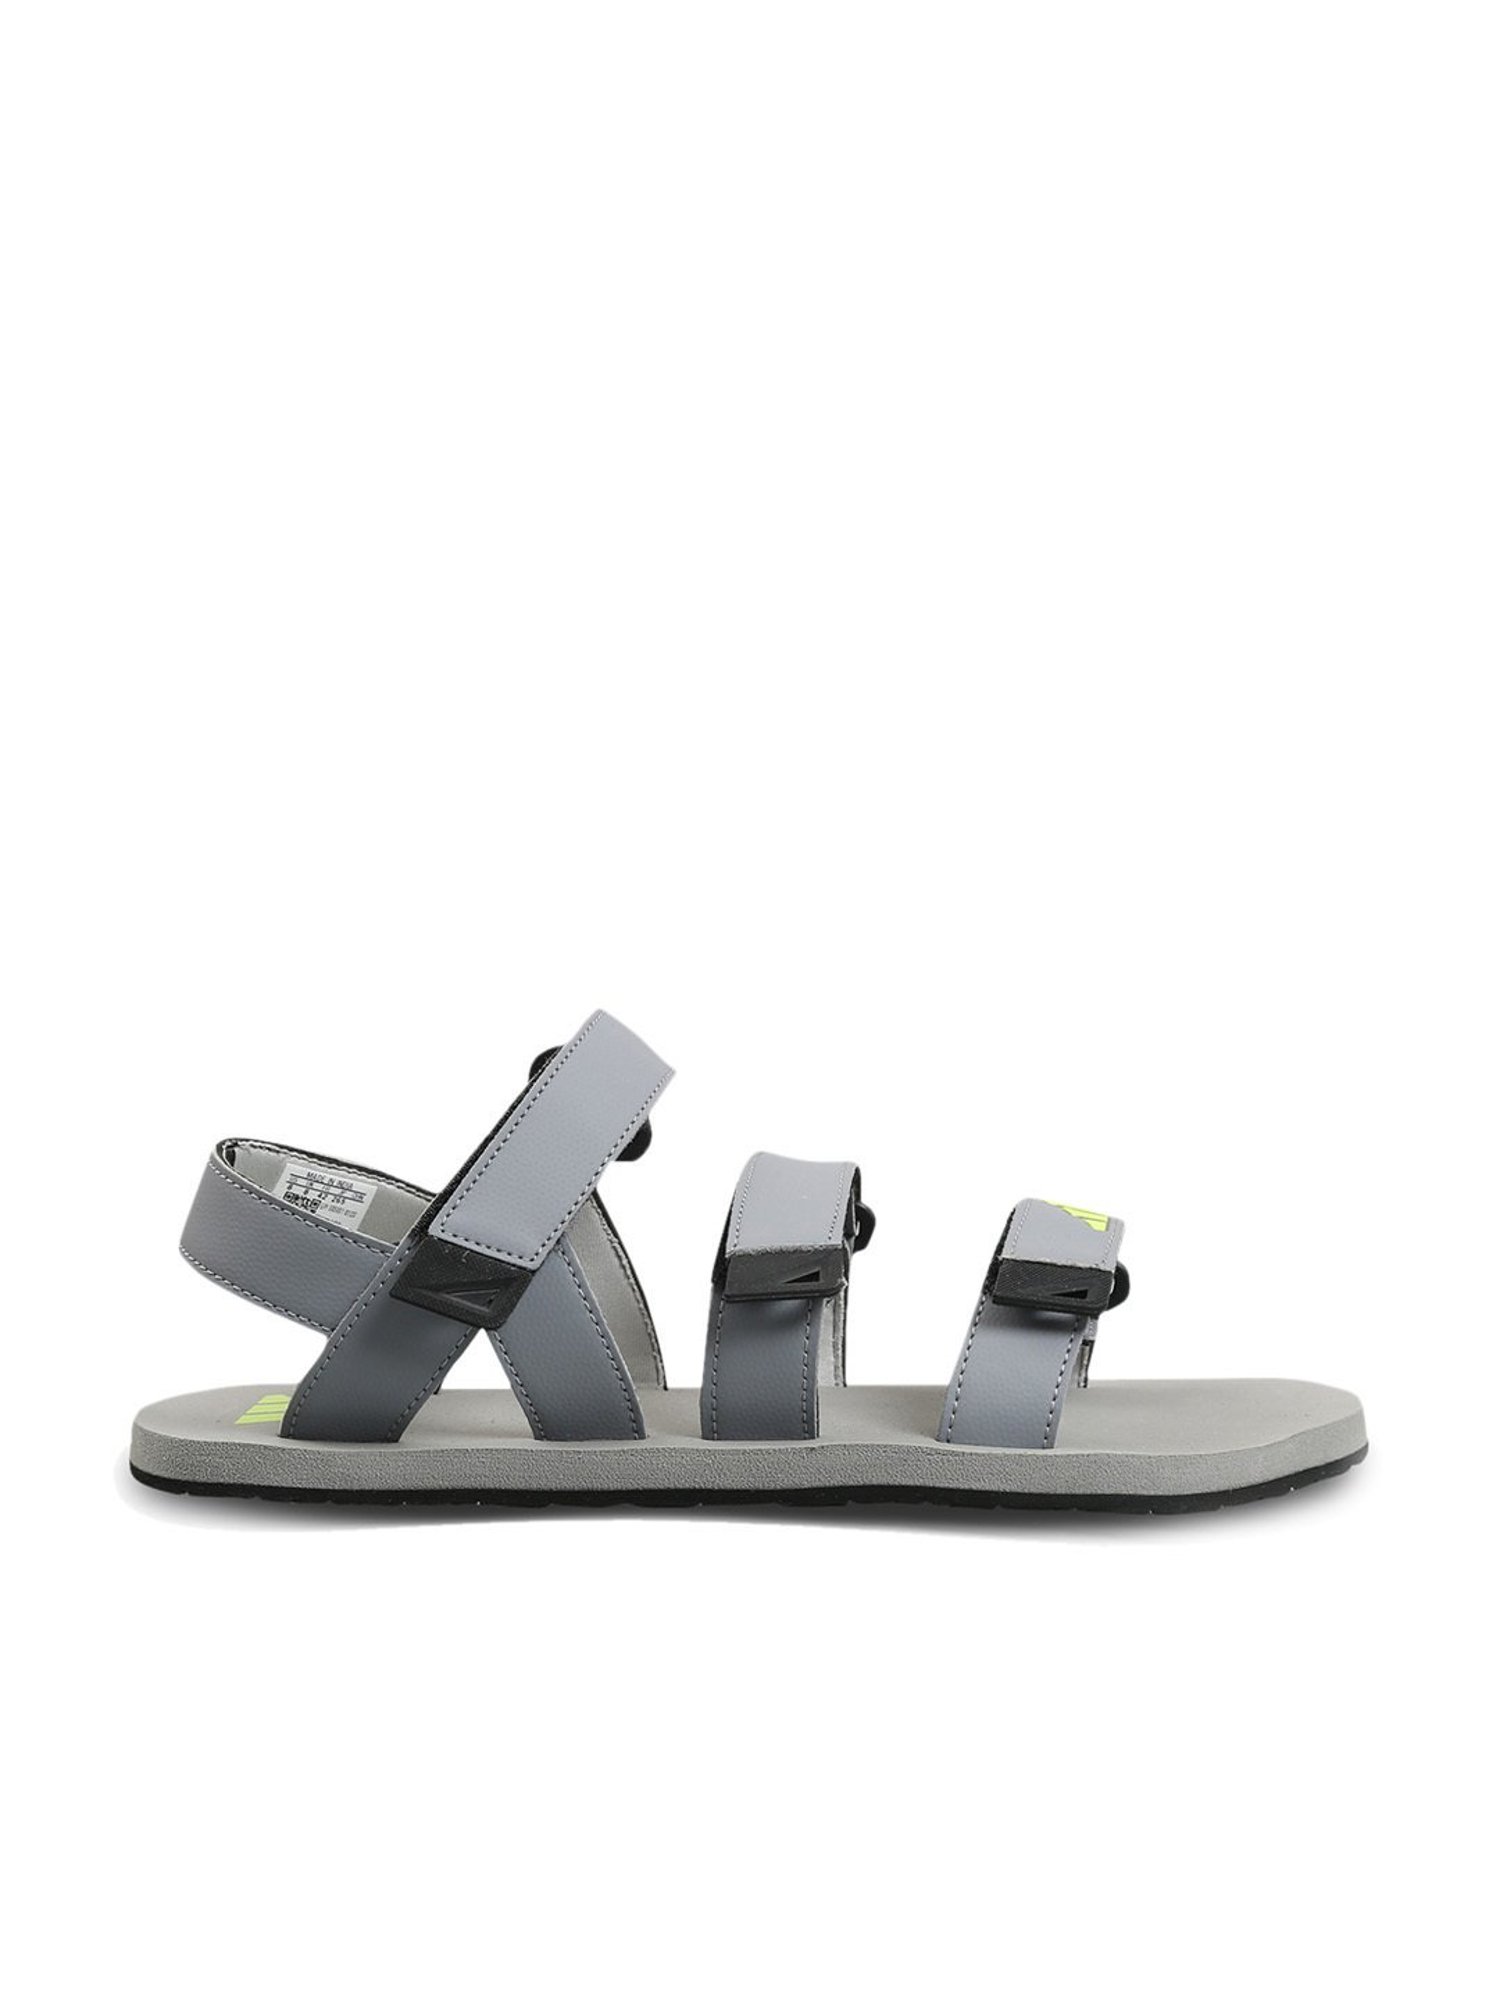 Men's Sandals With Arch Support Gemini Black | OrthoFeet